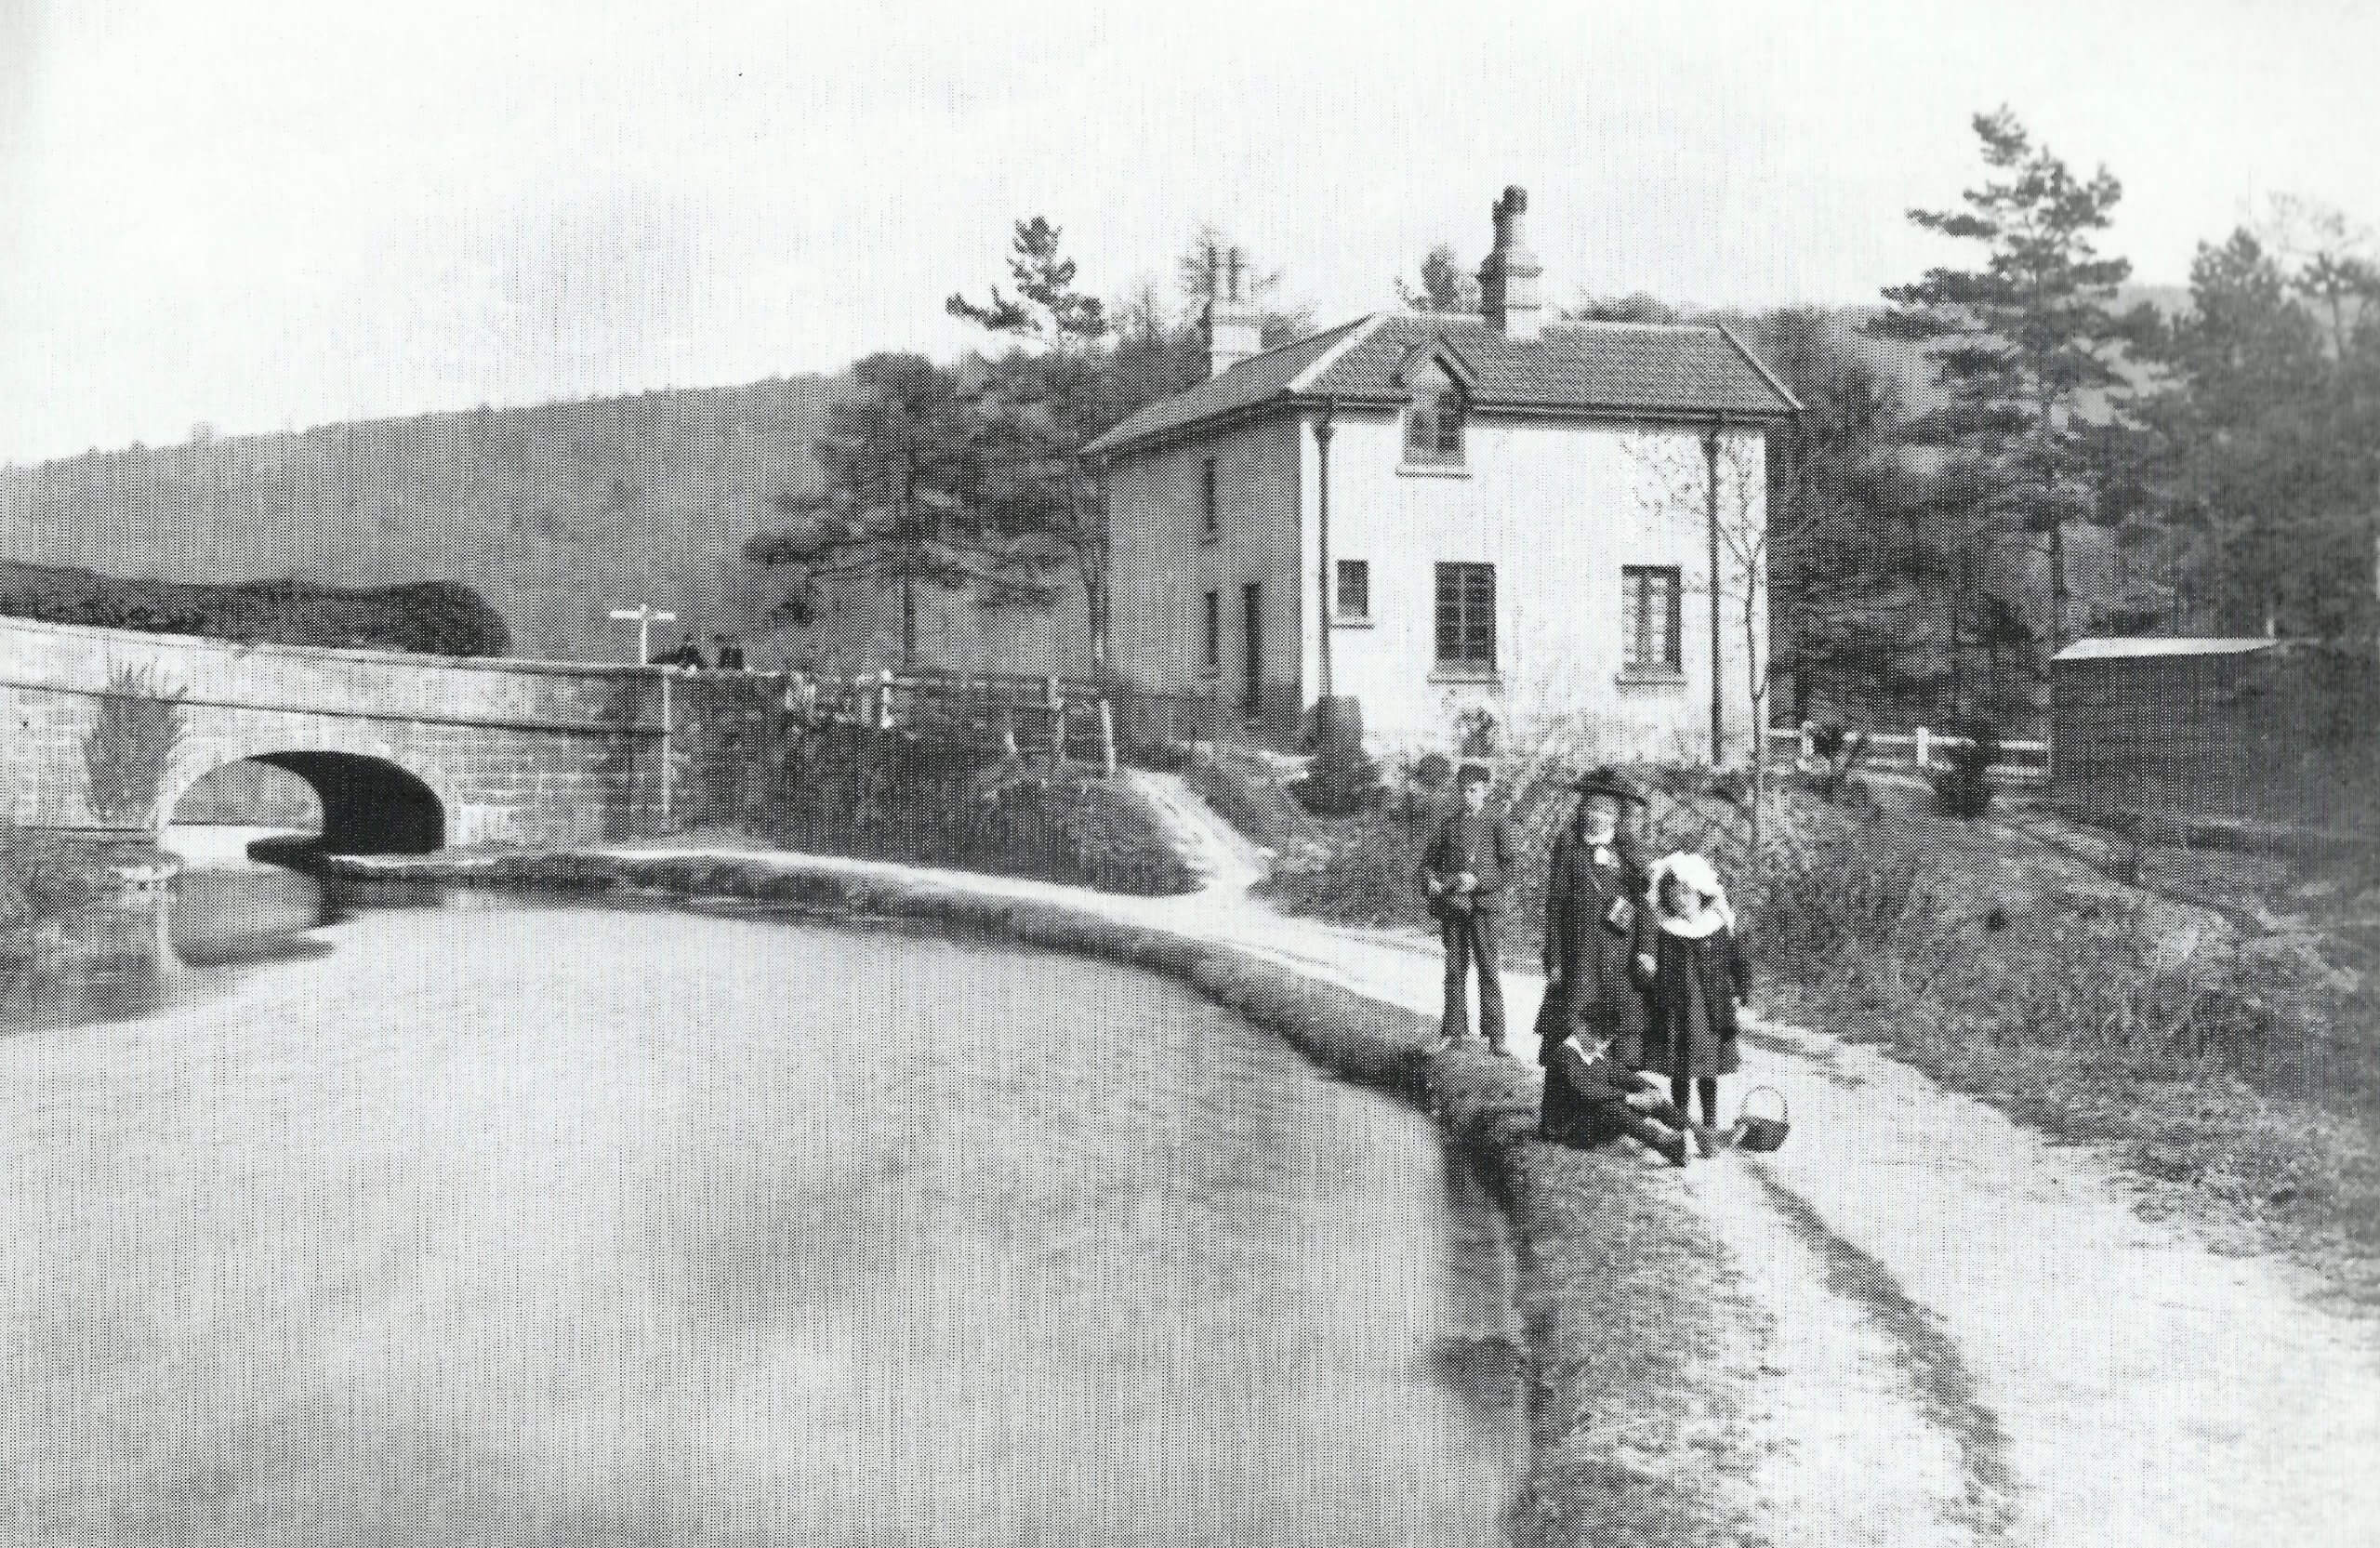 canal-bridge-at-brassknocker-hill-about-1890